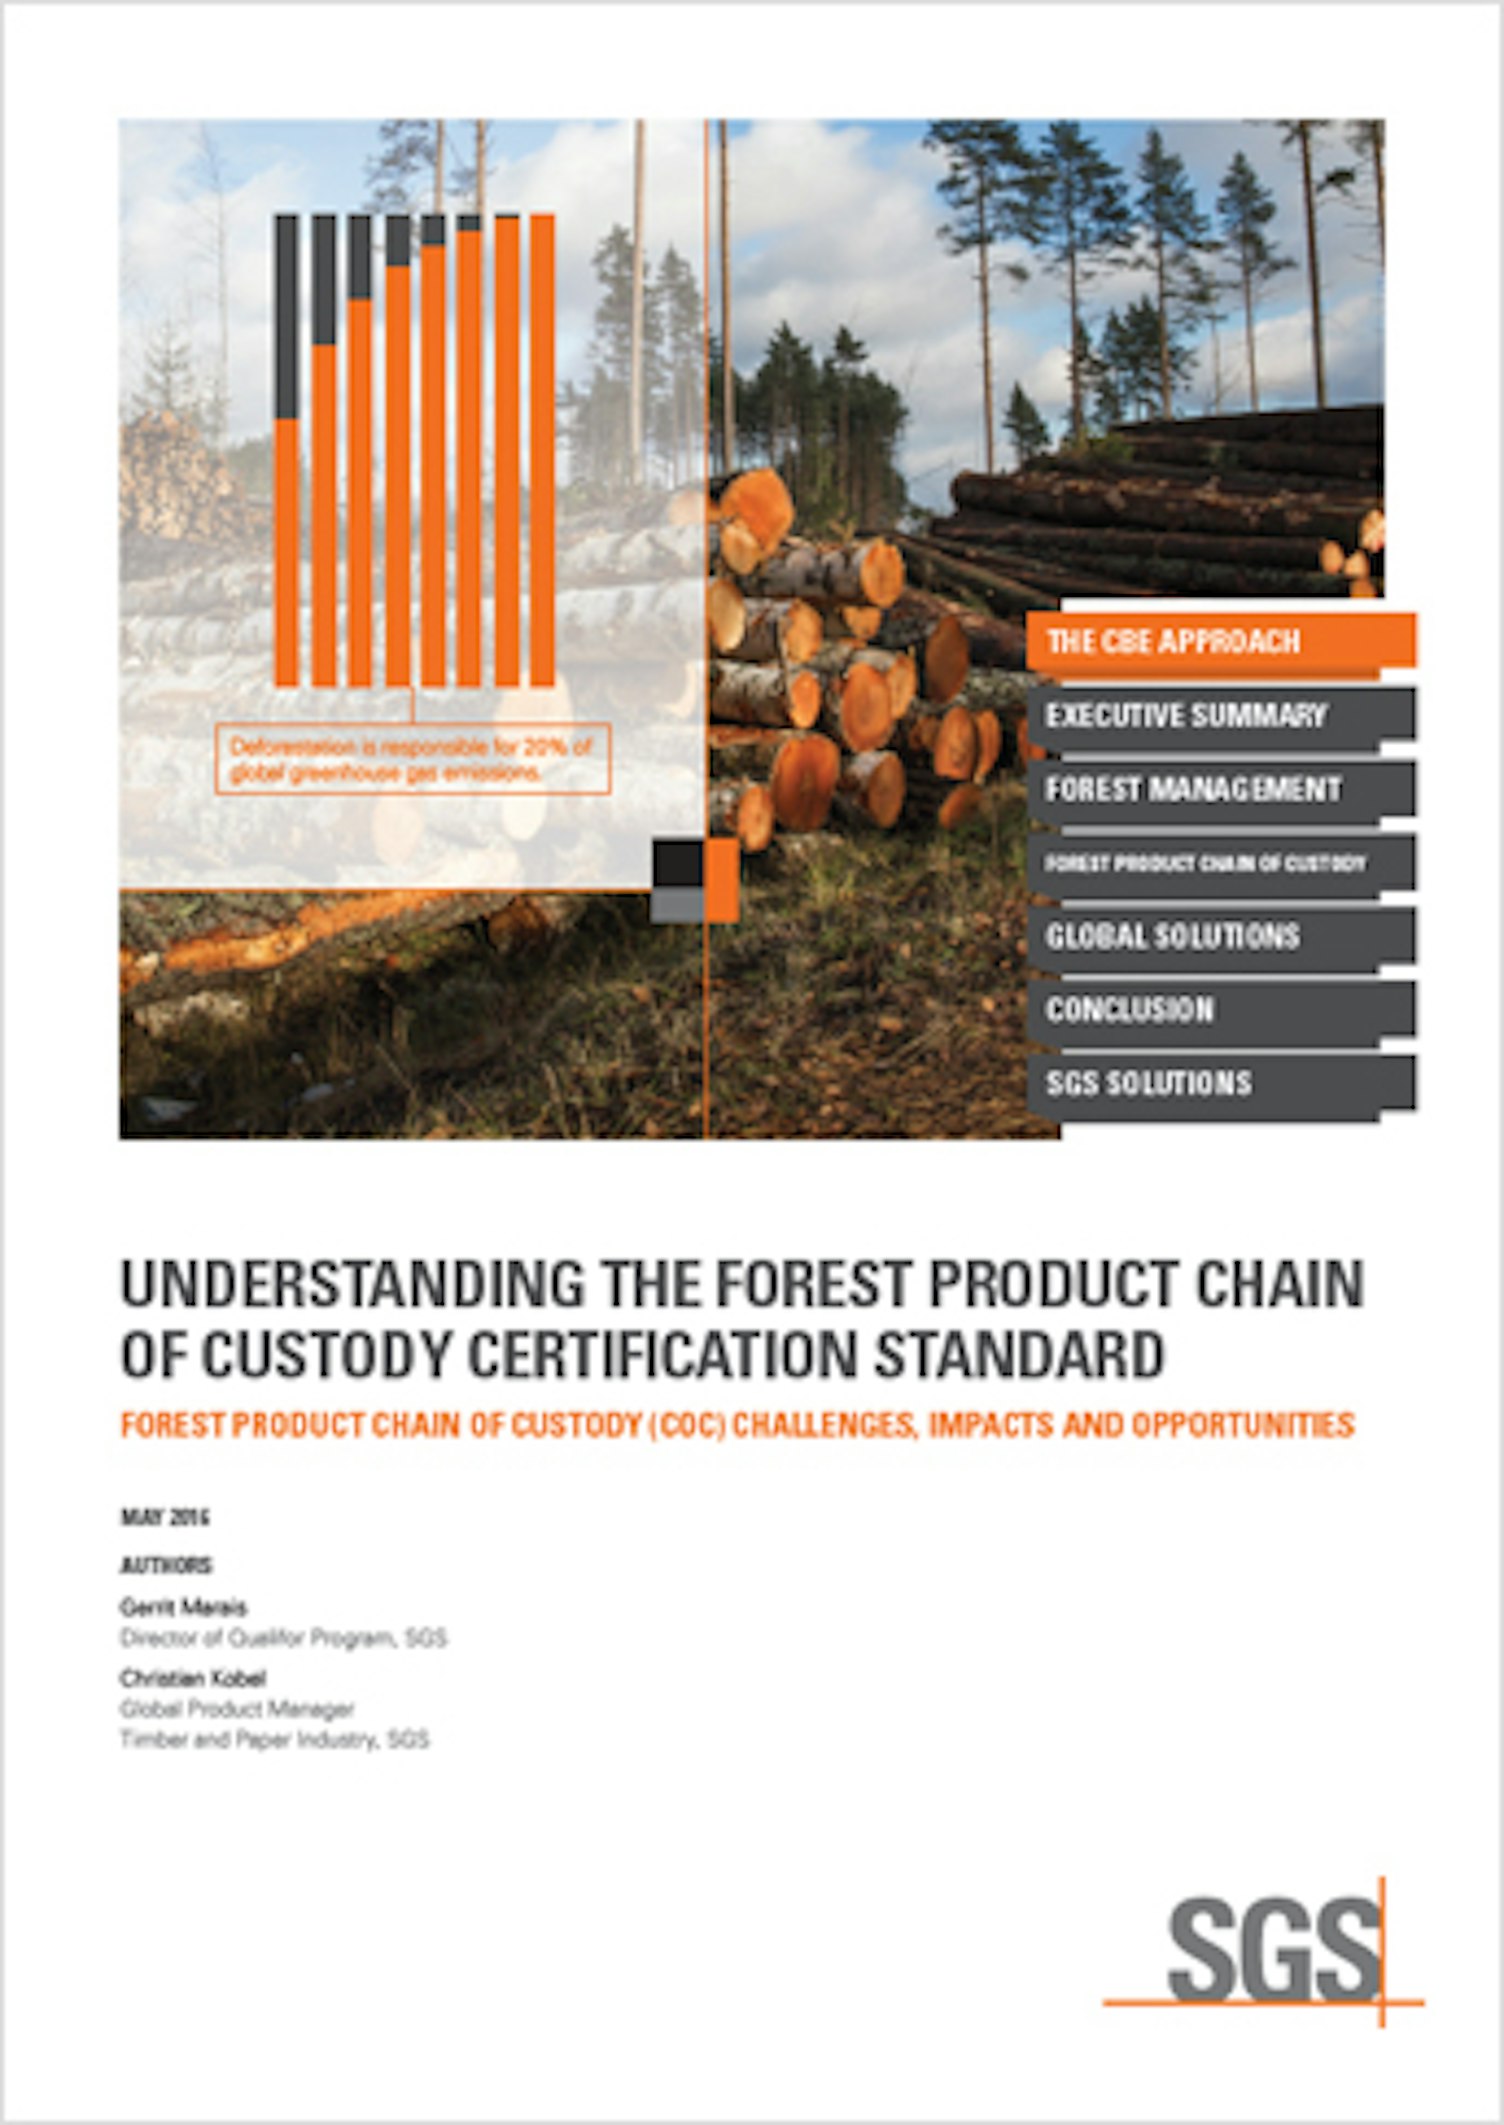 Understanding the Forest Product Chain of Custody Certification Standard